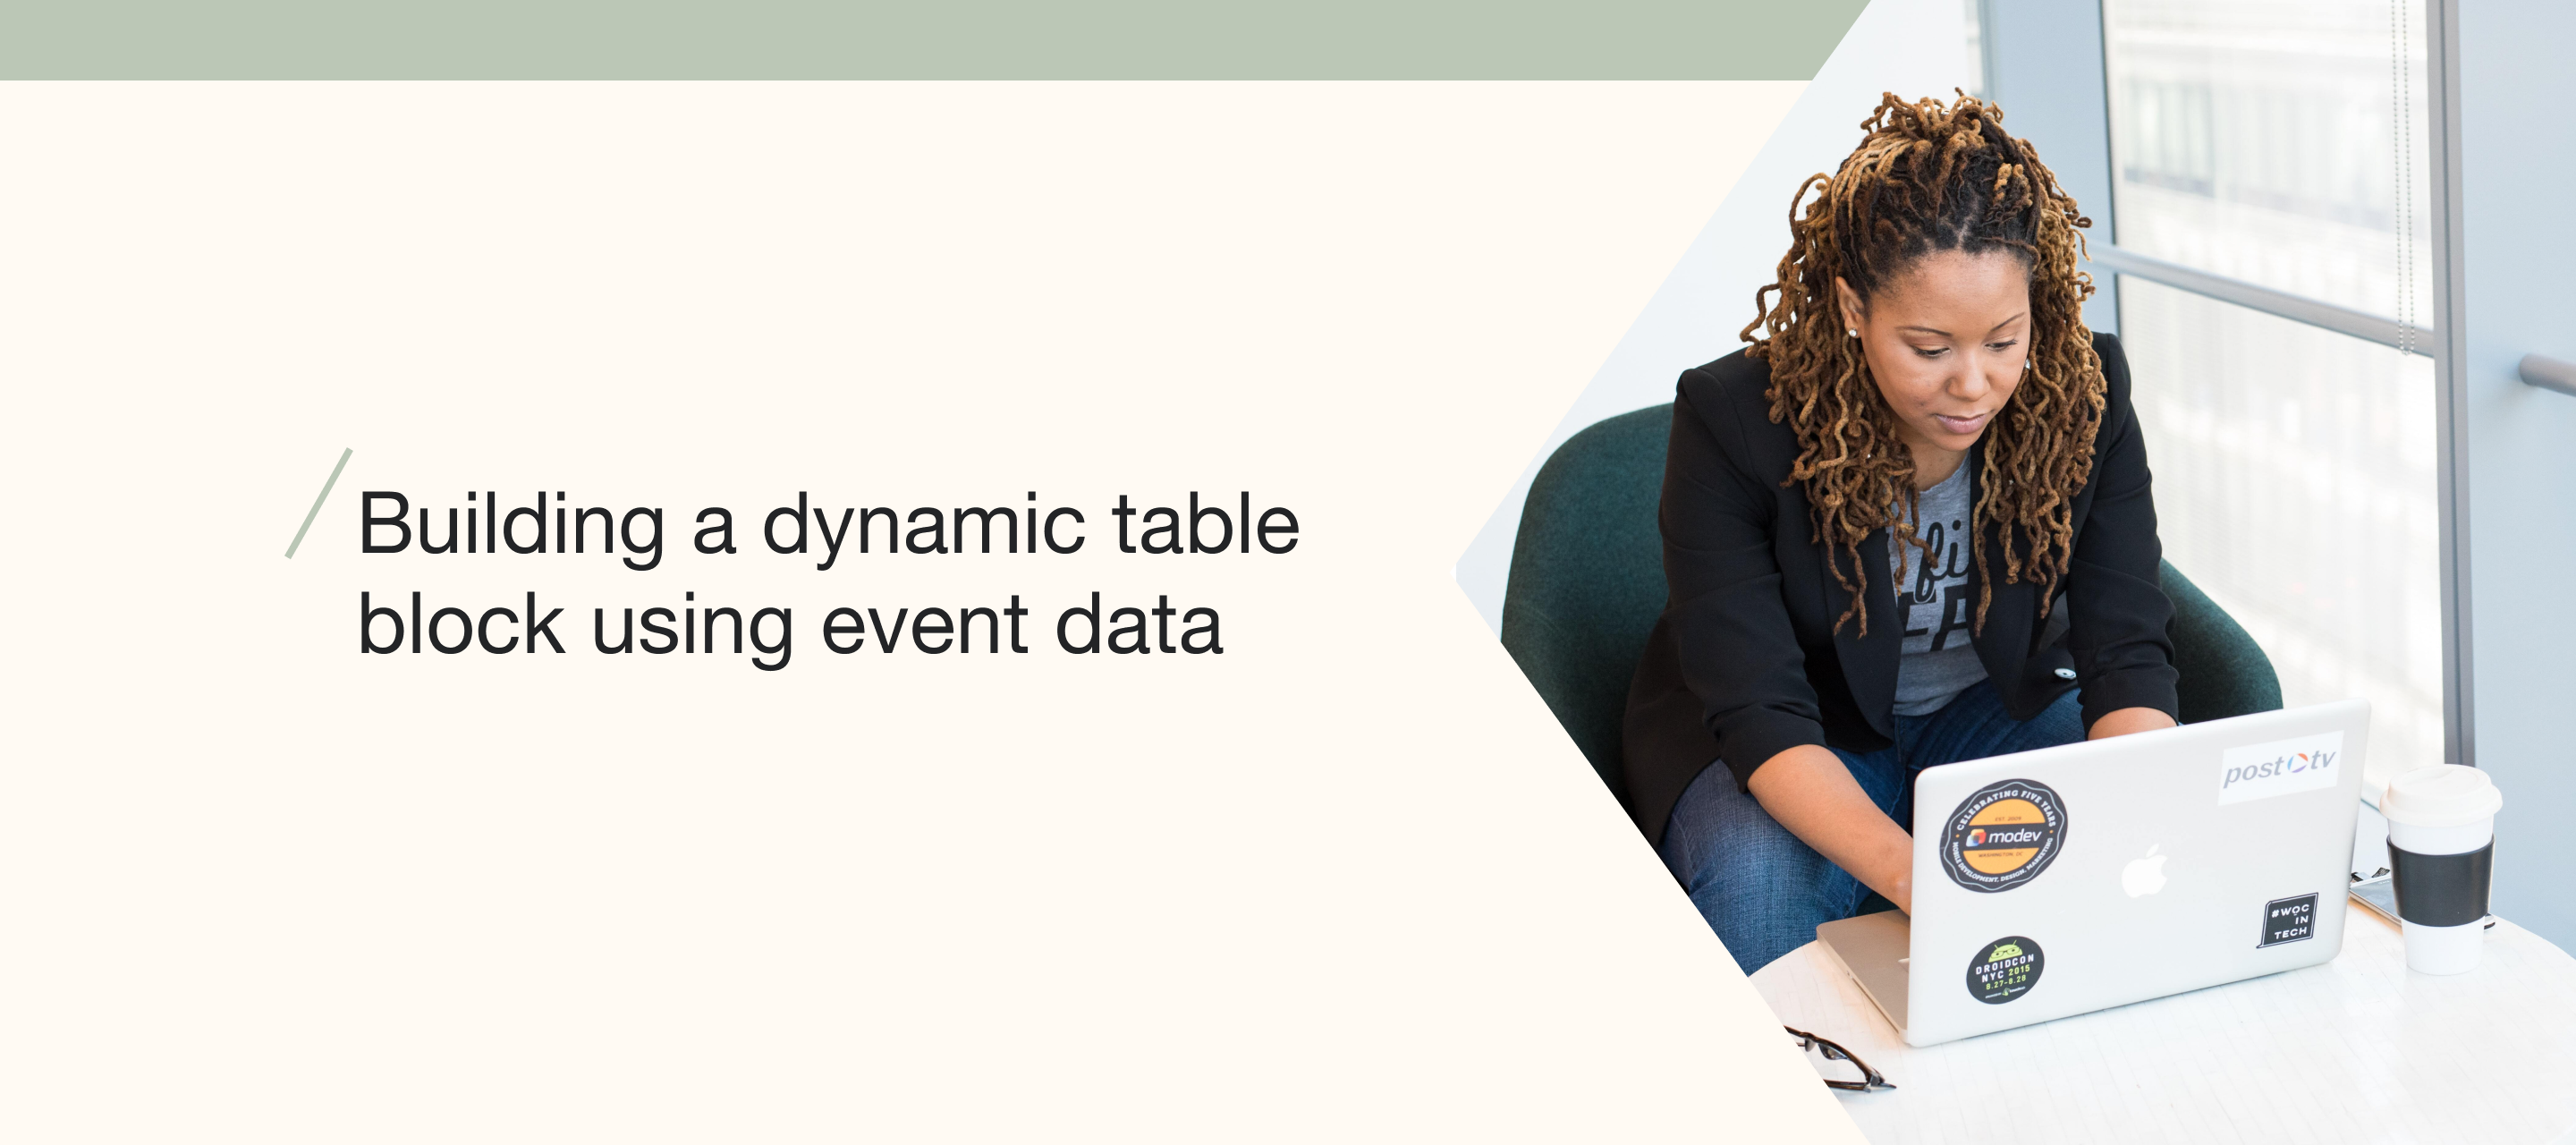 Building a dynamic table block using event data